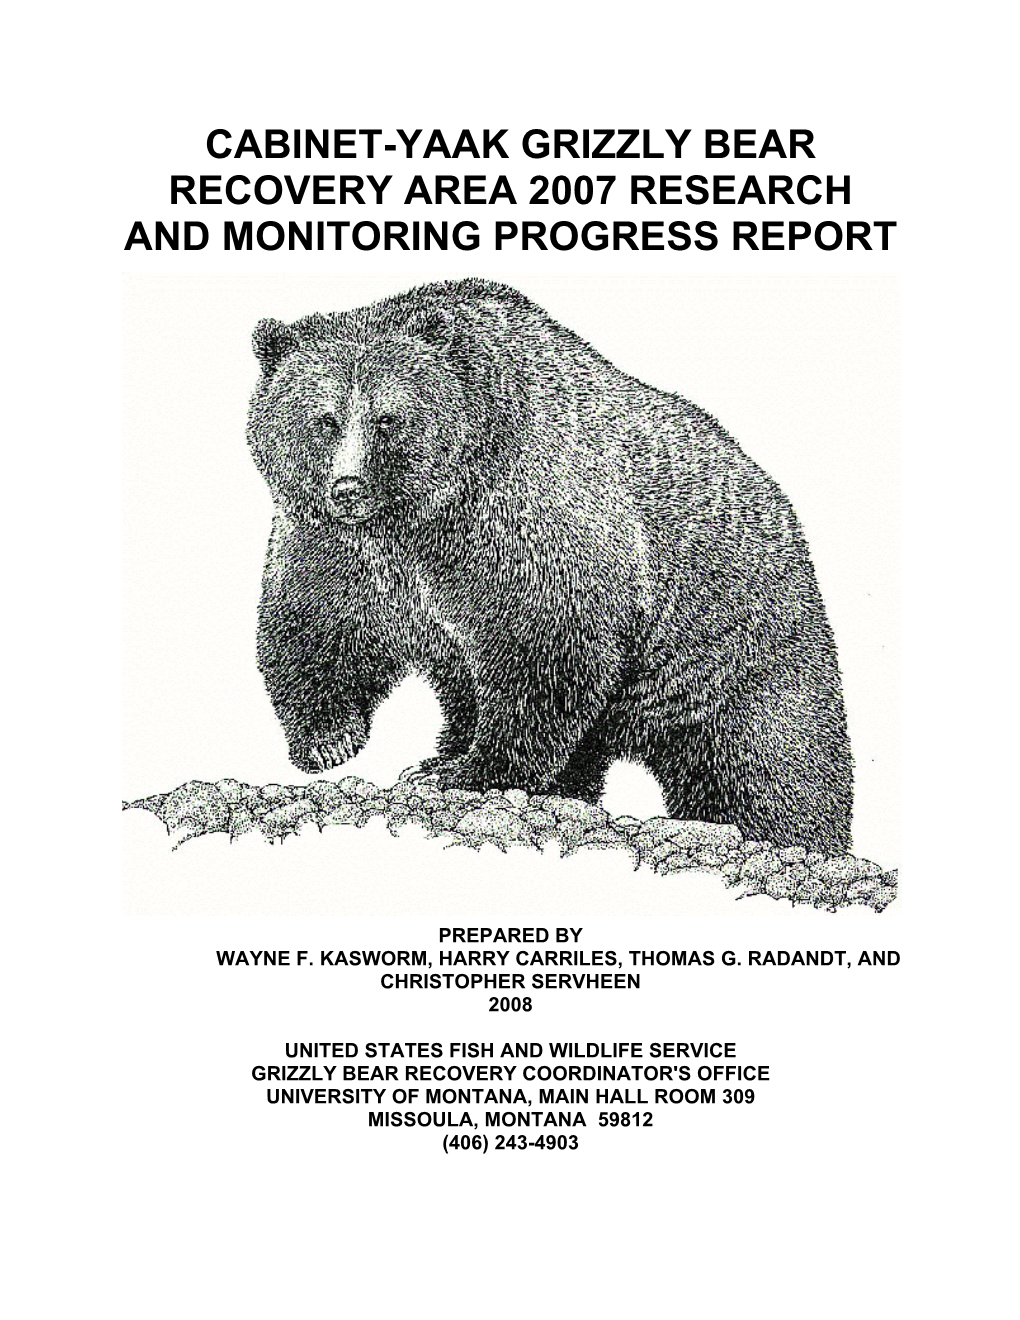 Cabinet-Yaak Grizzly Bear Recovery Area 2007 Research and Monitoring Progress Report